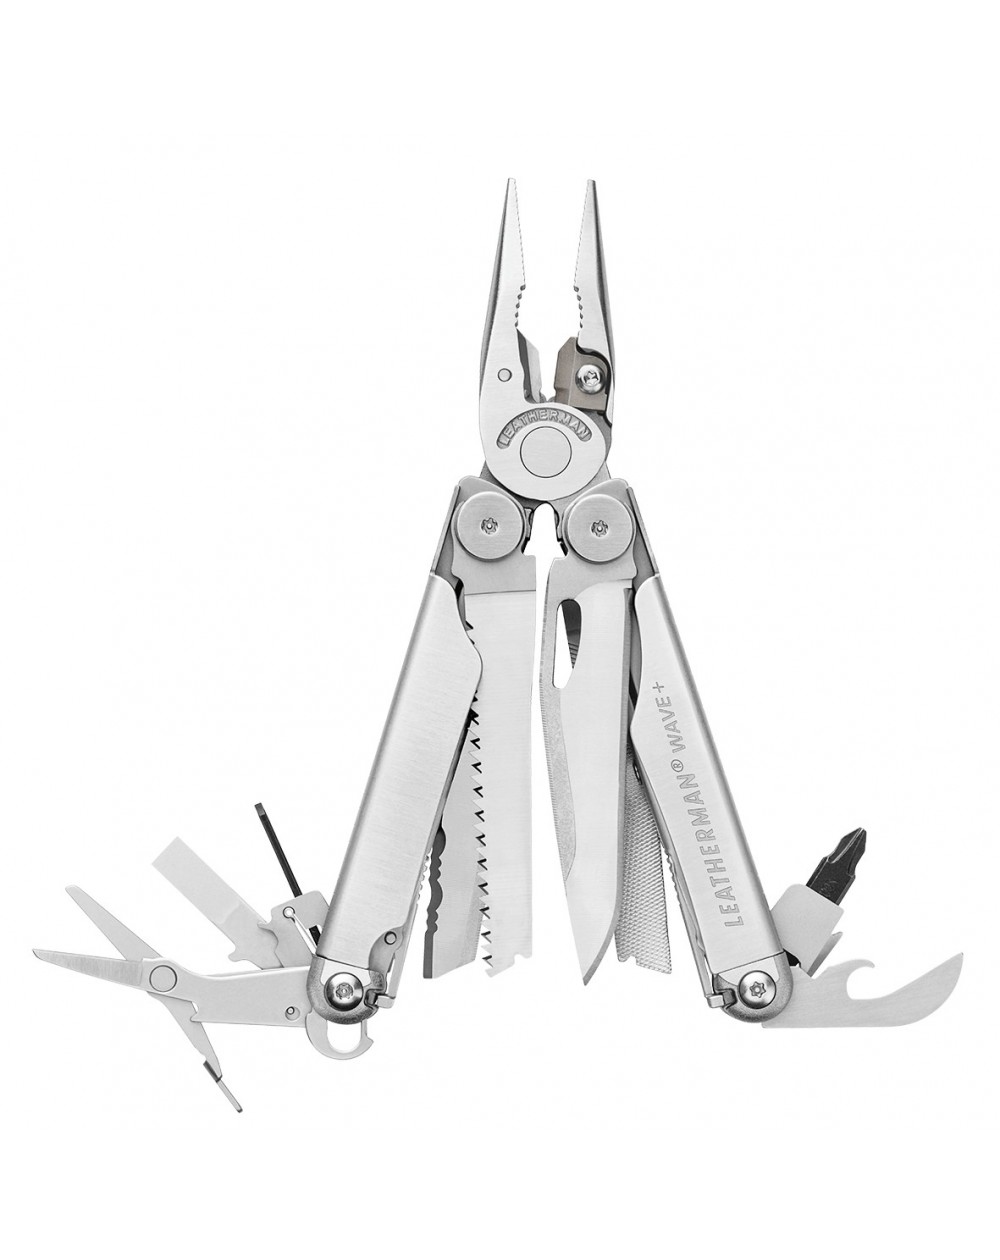 leatherman-pince-multifonctions-wave-plus-blister-832525-1